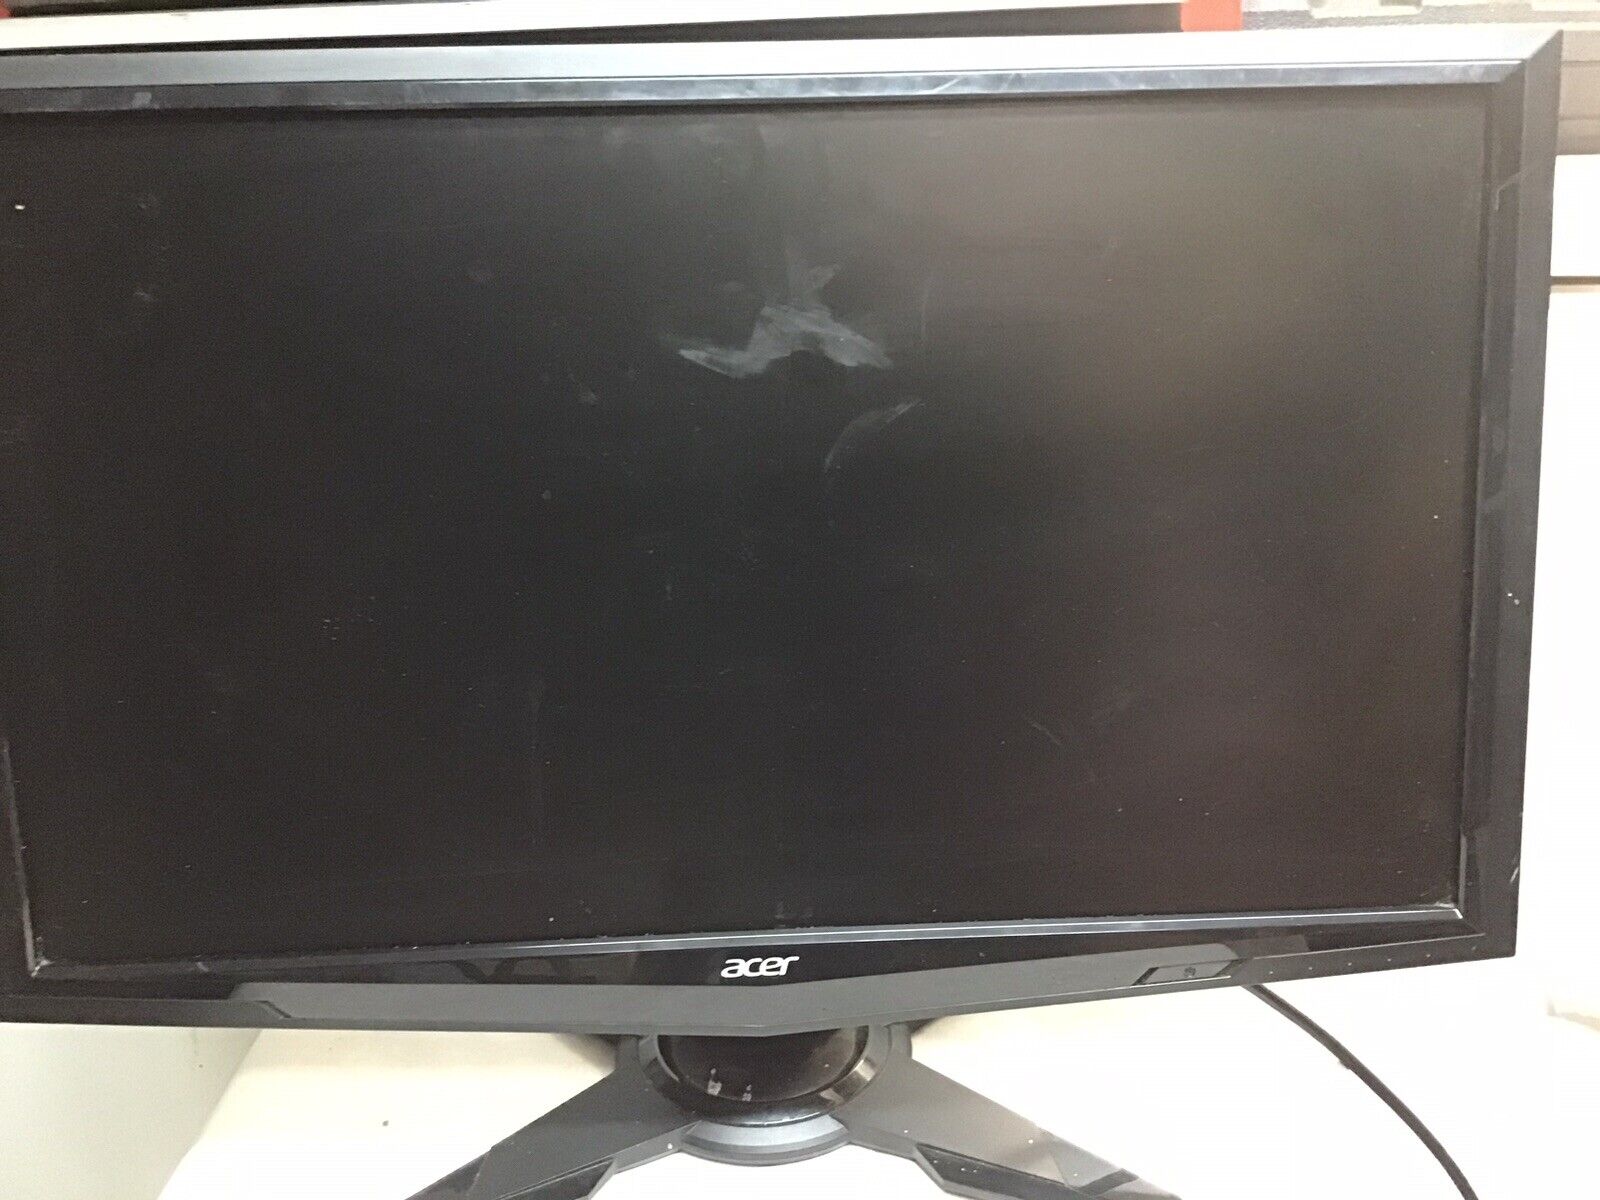 Acer G245HQ Abmid Black 23.6 in Widescreen Flat Panel Backlit LCD Monitor